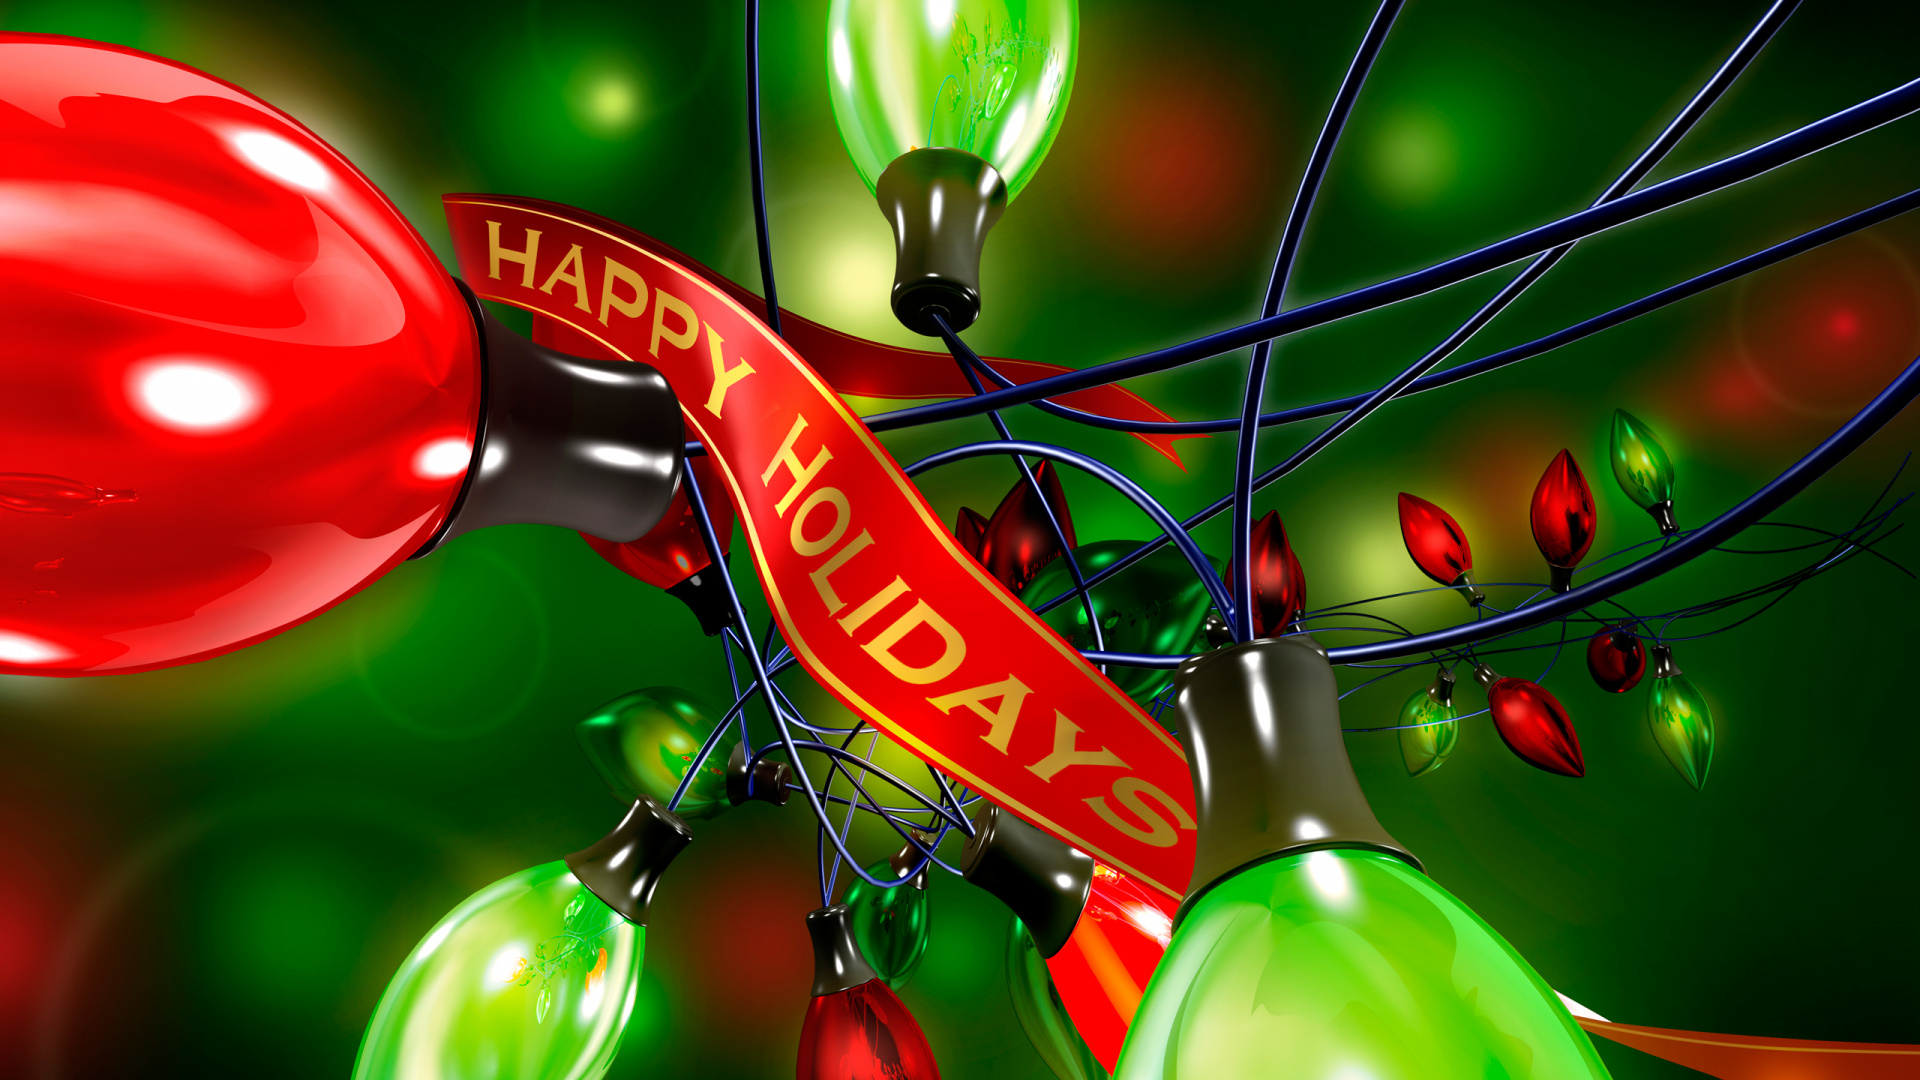 Birthday, Green, Red, Christmas Ornament, Christmas Decoration. Wallpaper in 1920x1080 Resolution